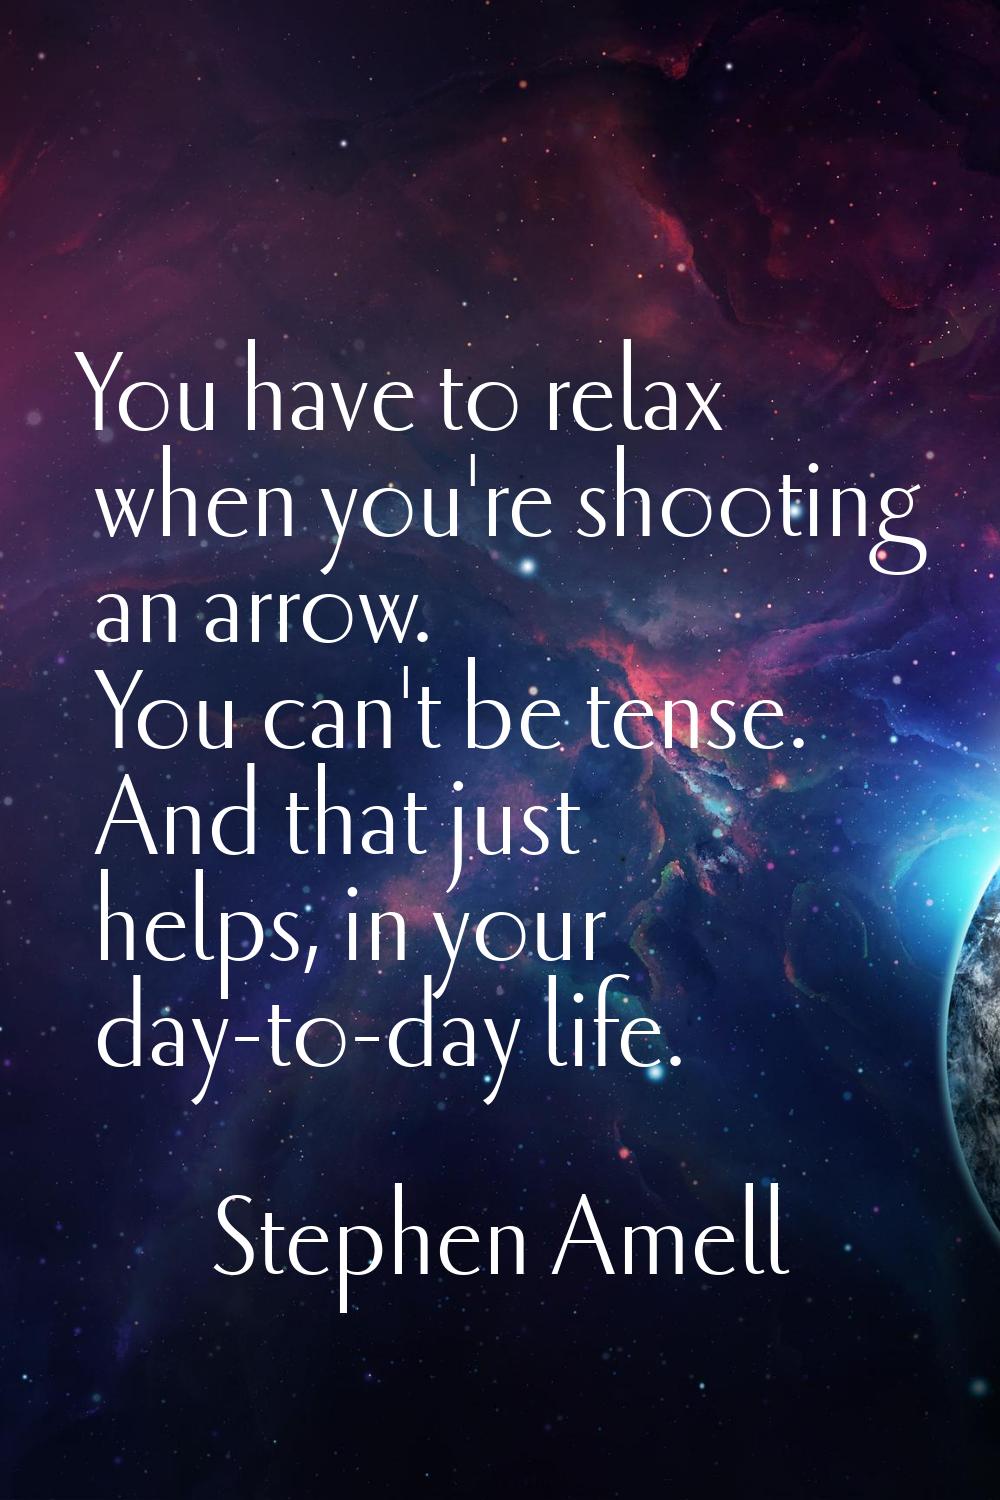 You have to relax when you're shooting an arrow. You can't be tense. And that just helps, in your d